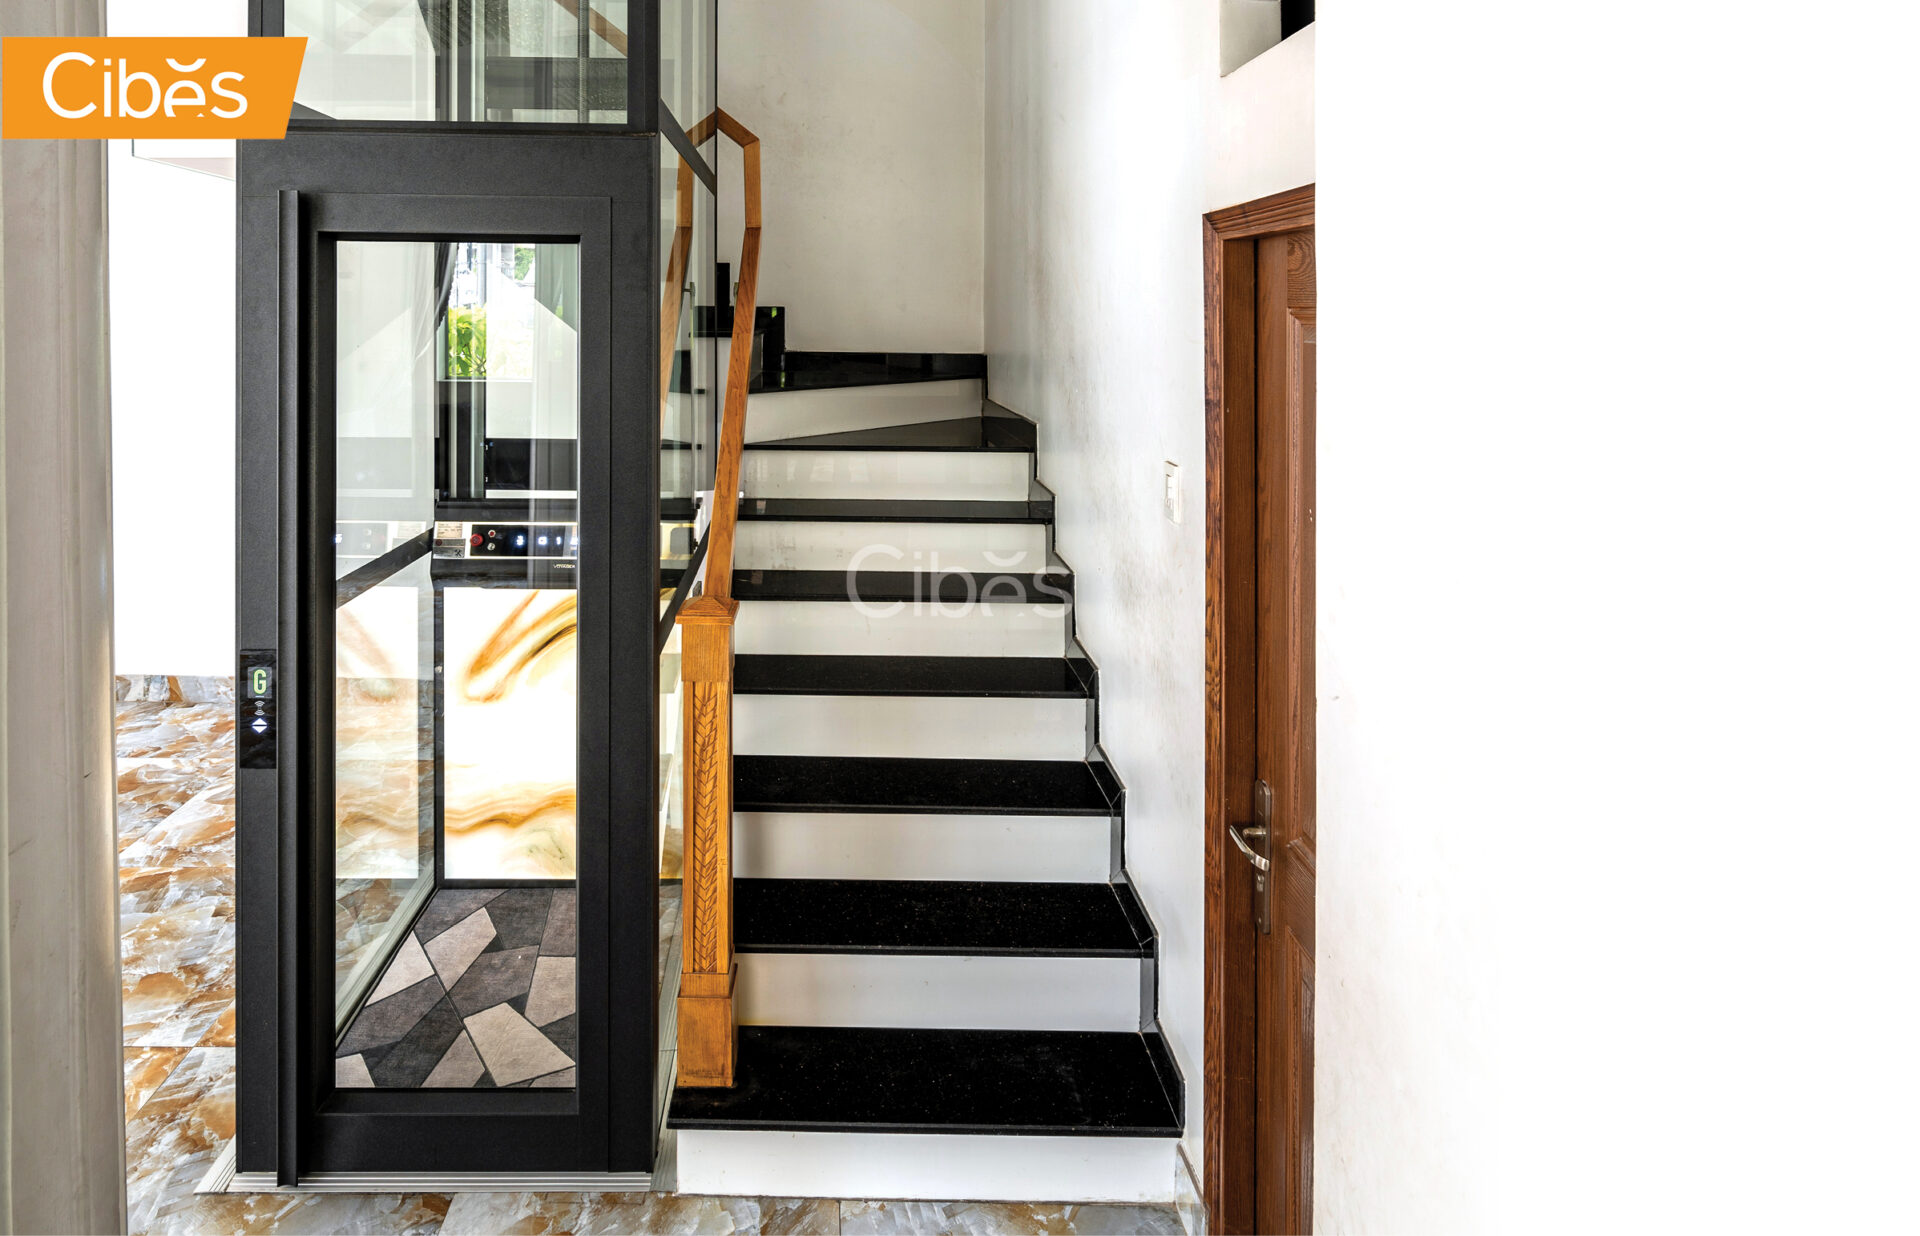 HOME LIFTS – Middle of stairs aur3